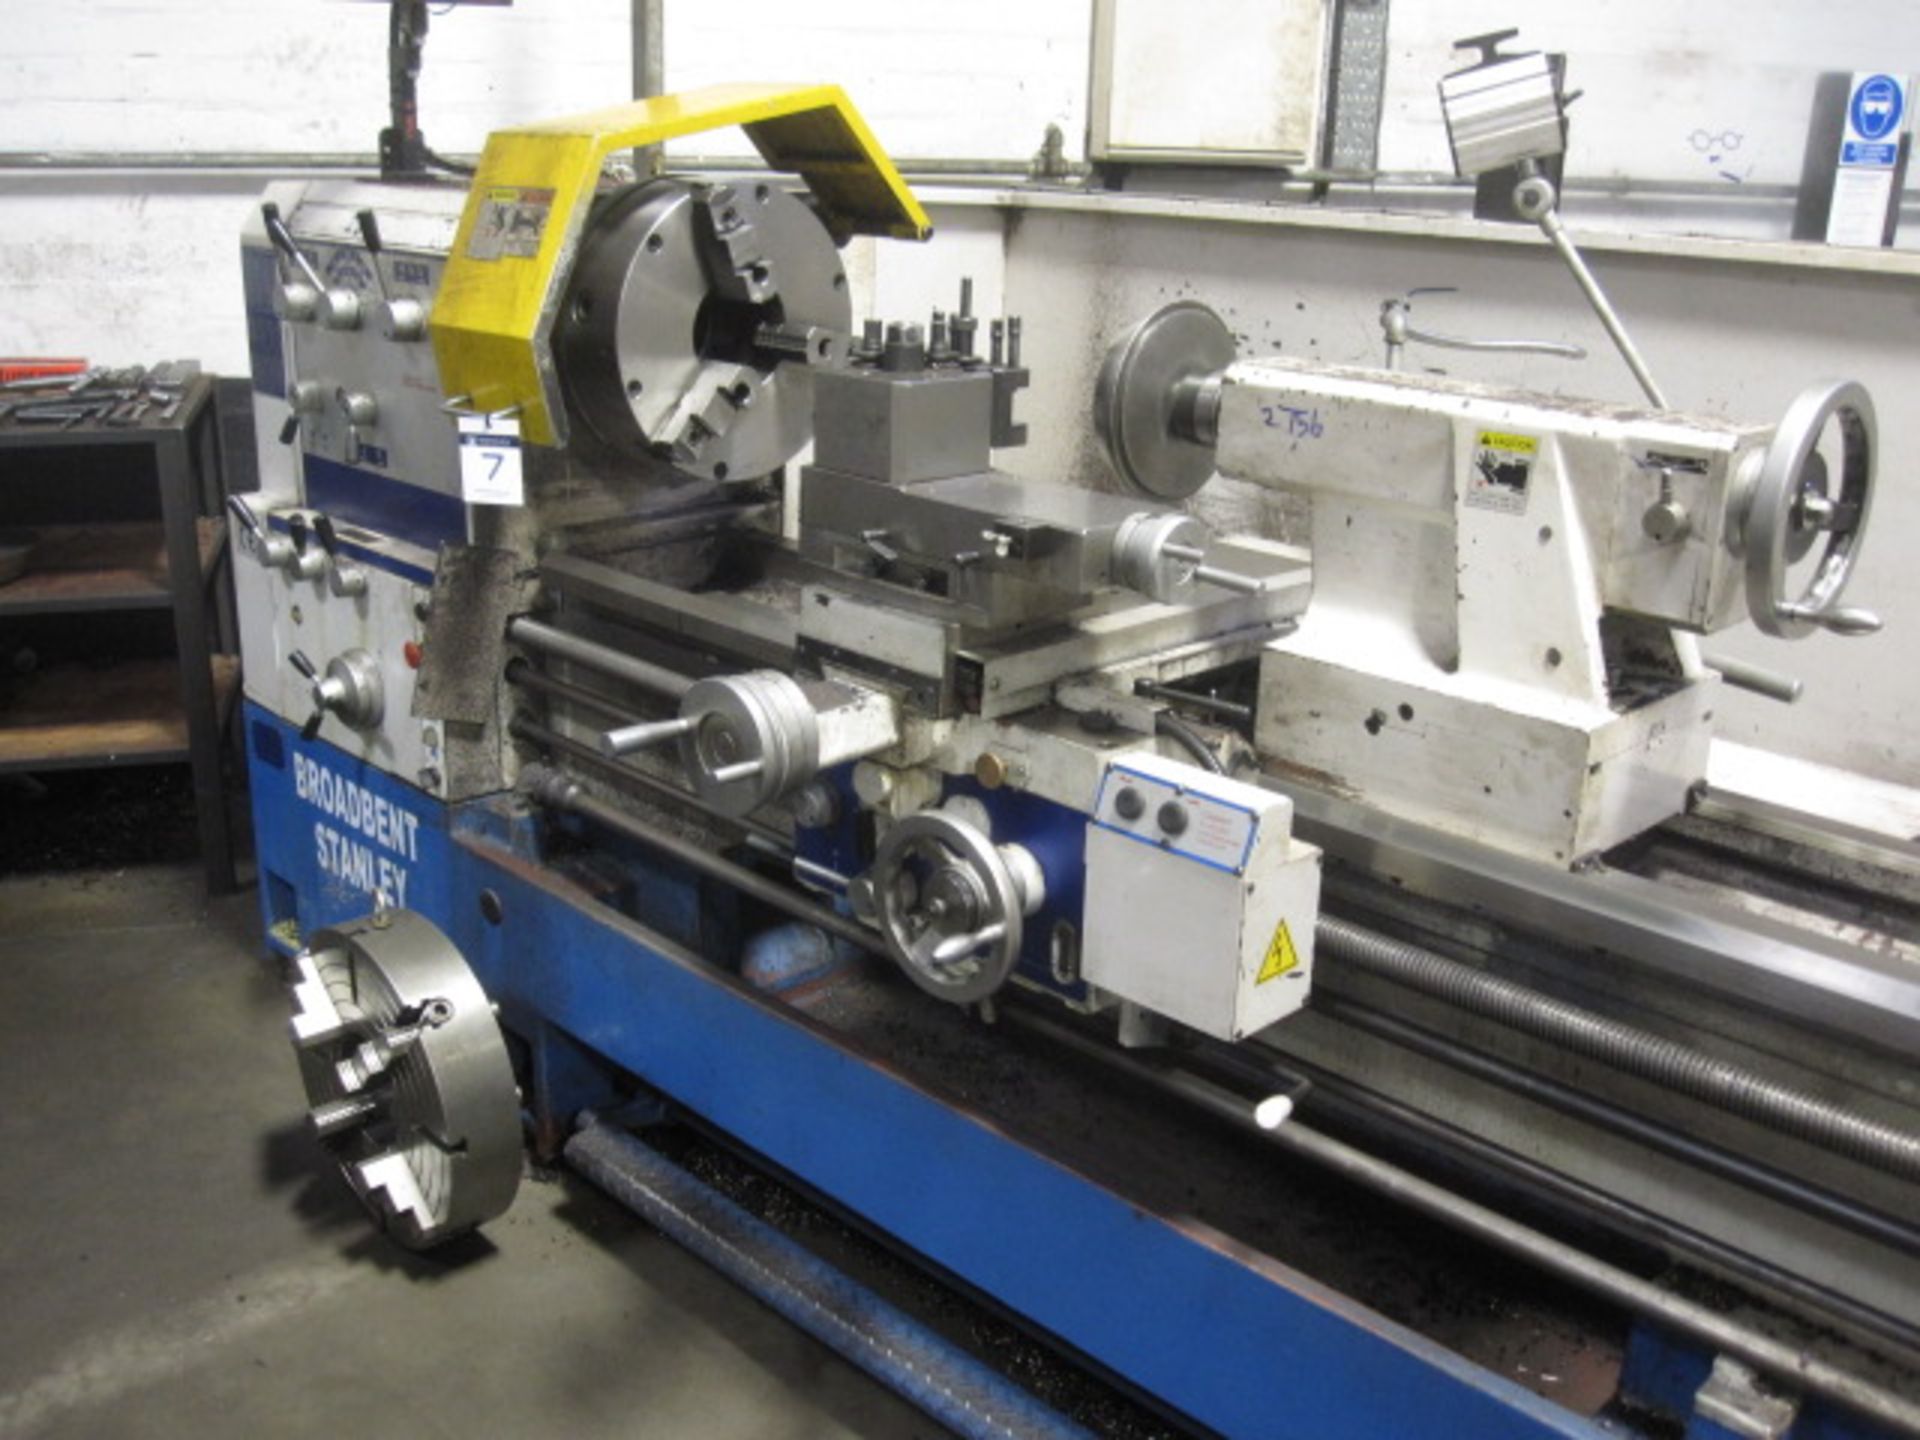 BROADBENT STANLEY Model BS 660 x 3300G, SS&SC manual gap-bed precision centre lathe. Serial No/ - Image 3 of 3